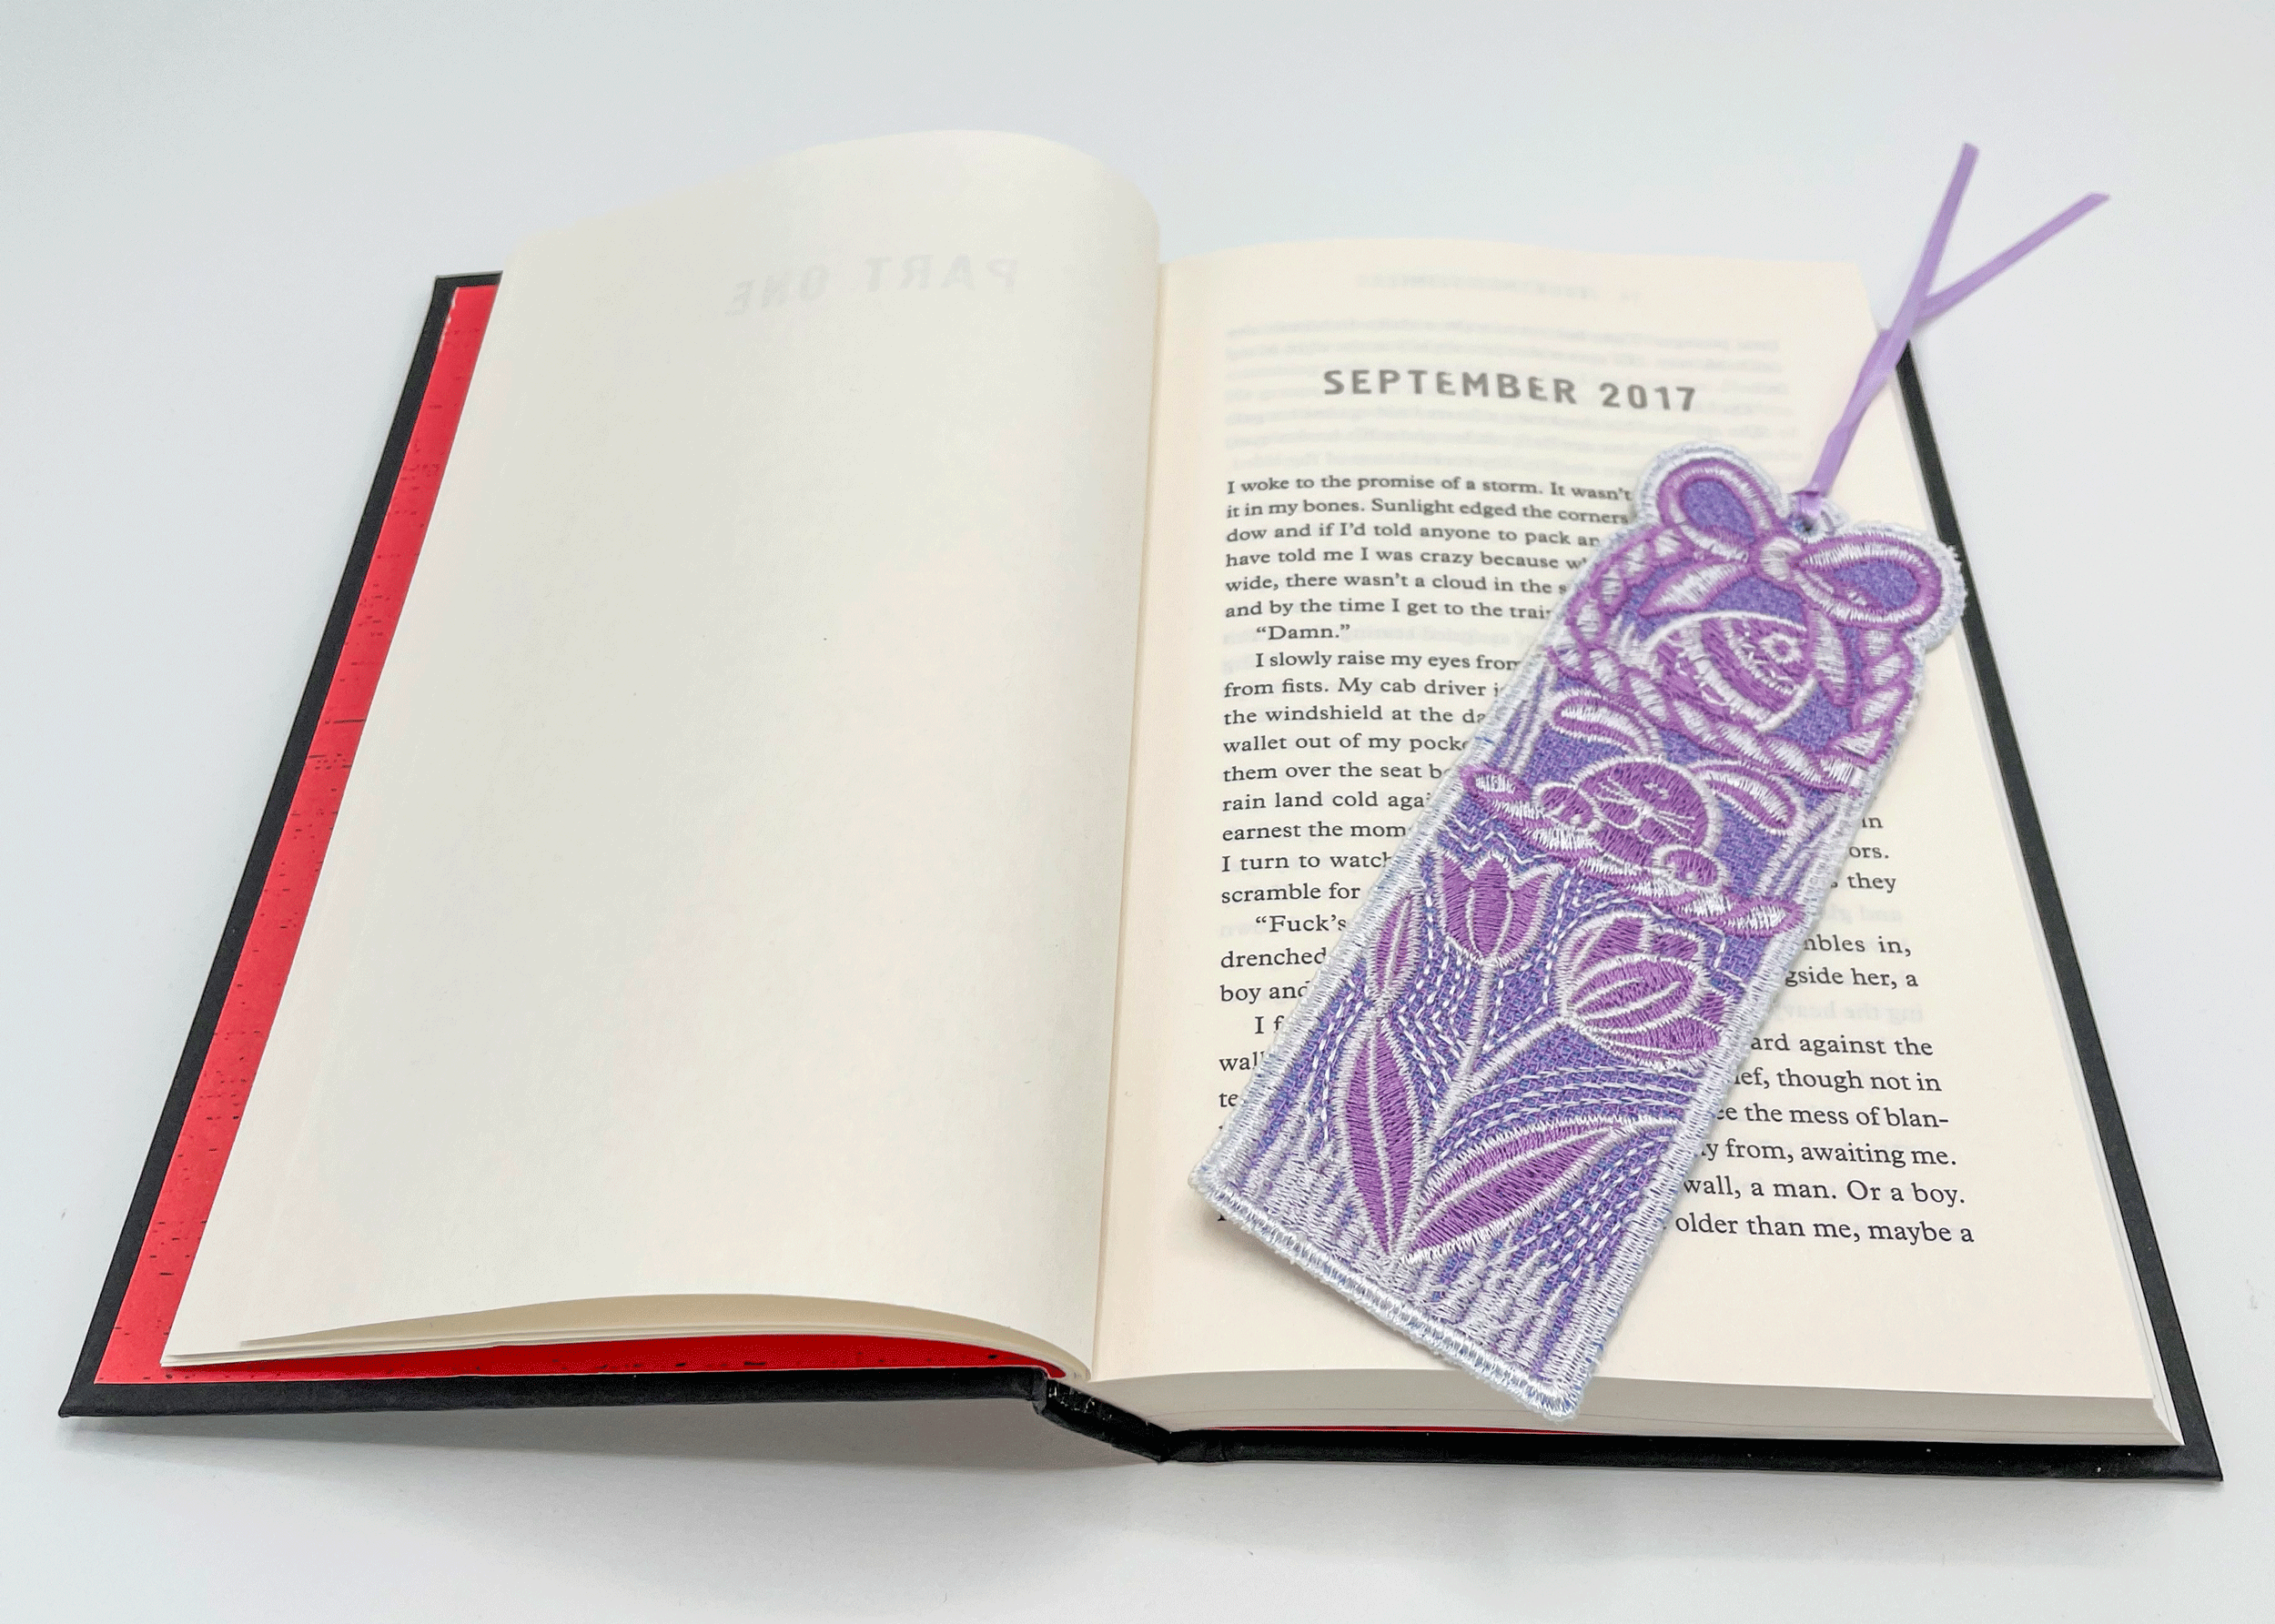 Easter Bunny Bookmark